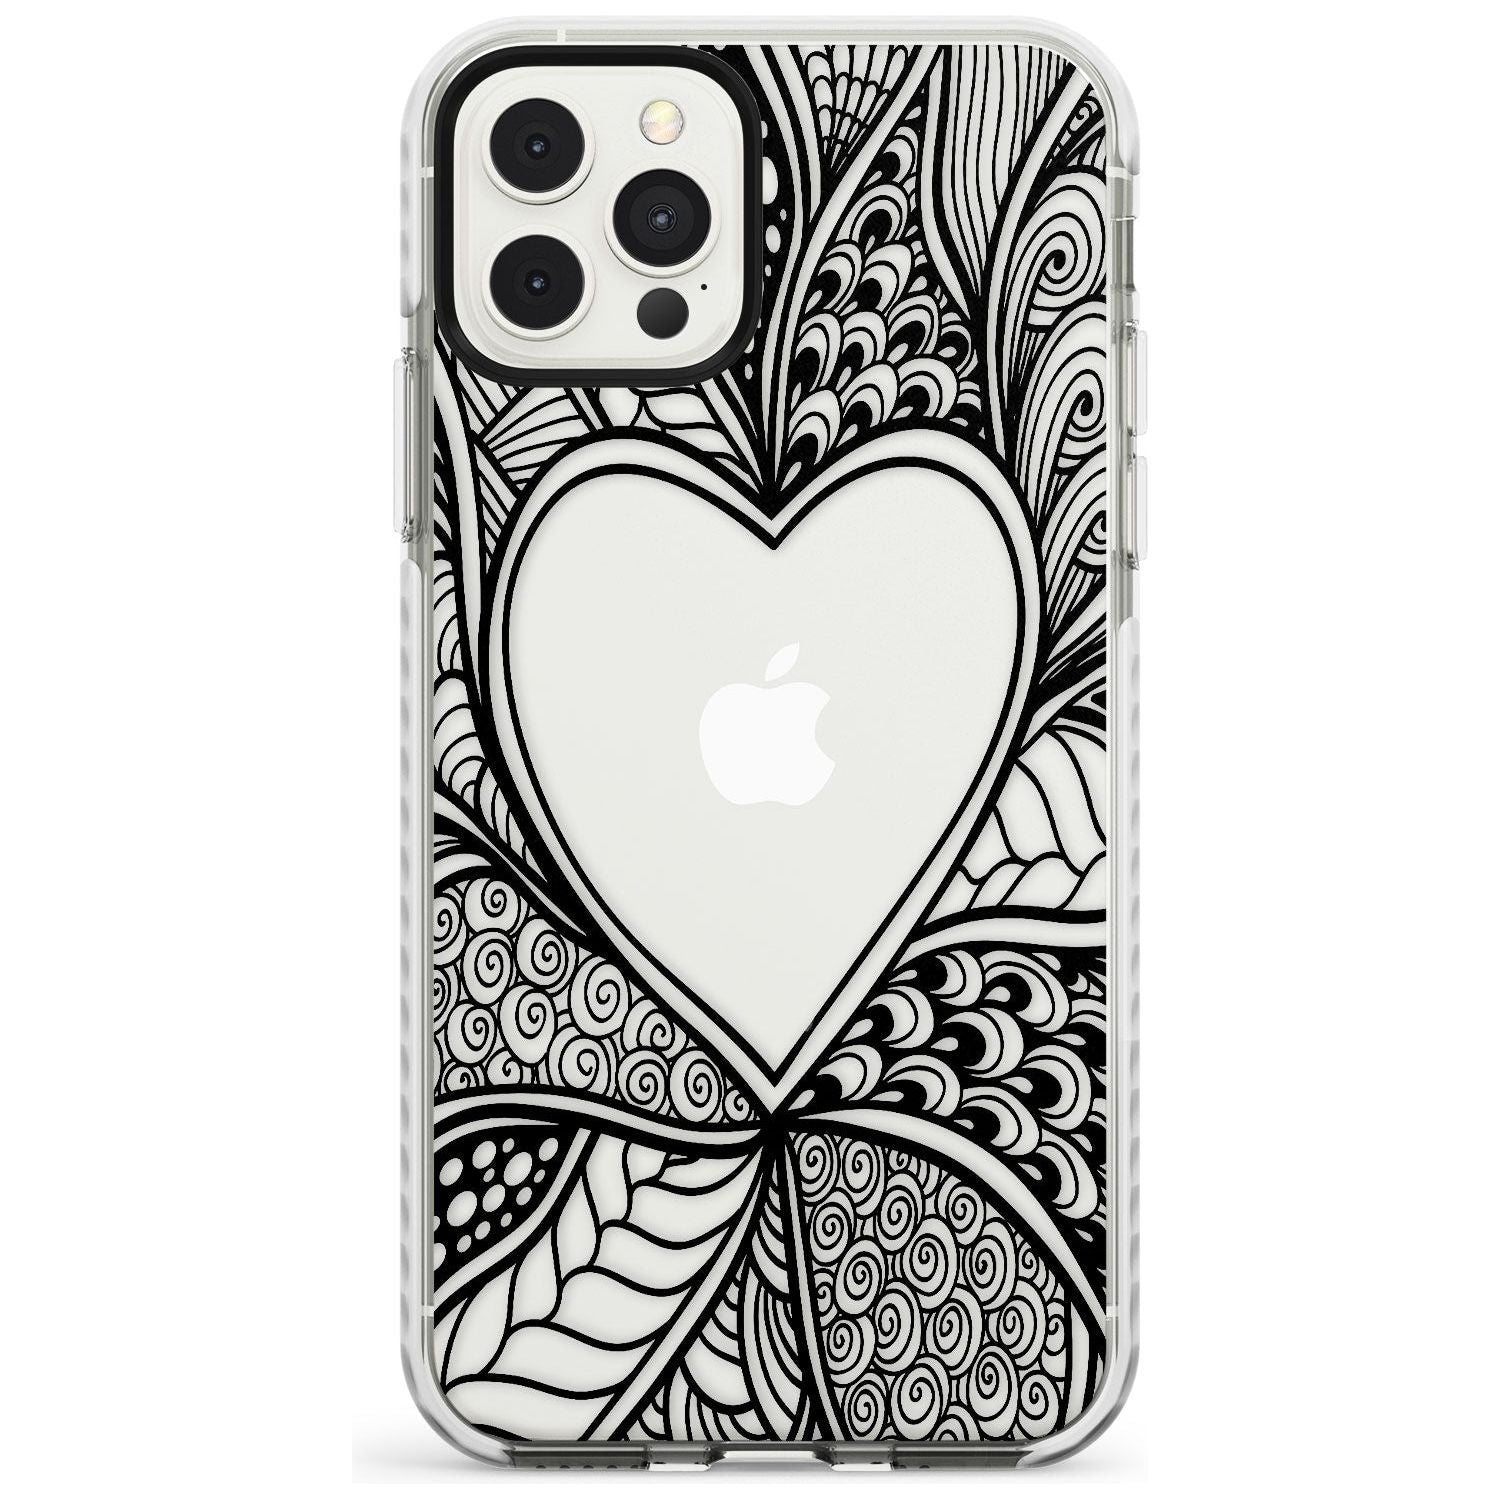 Black Henna Heart Impact Phone Case for iPhone 11 Pro Max